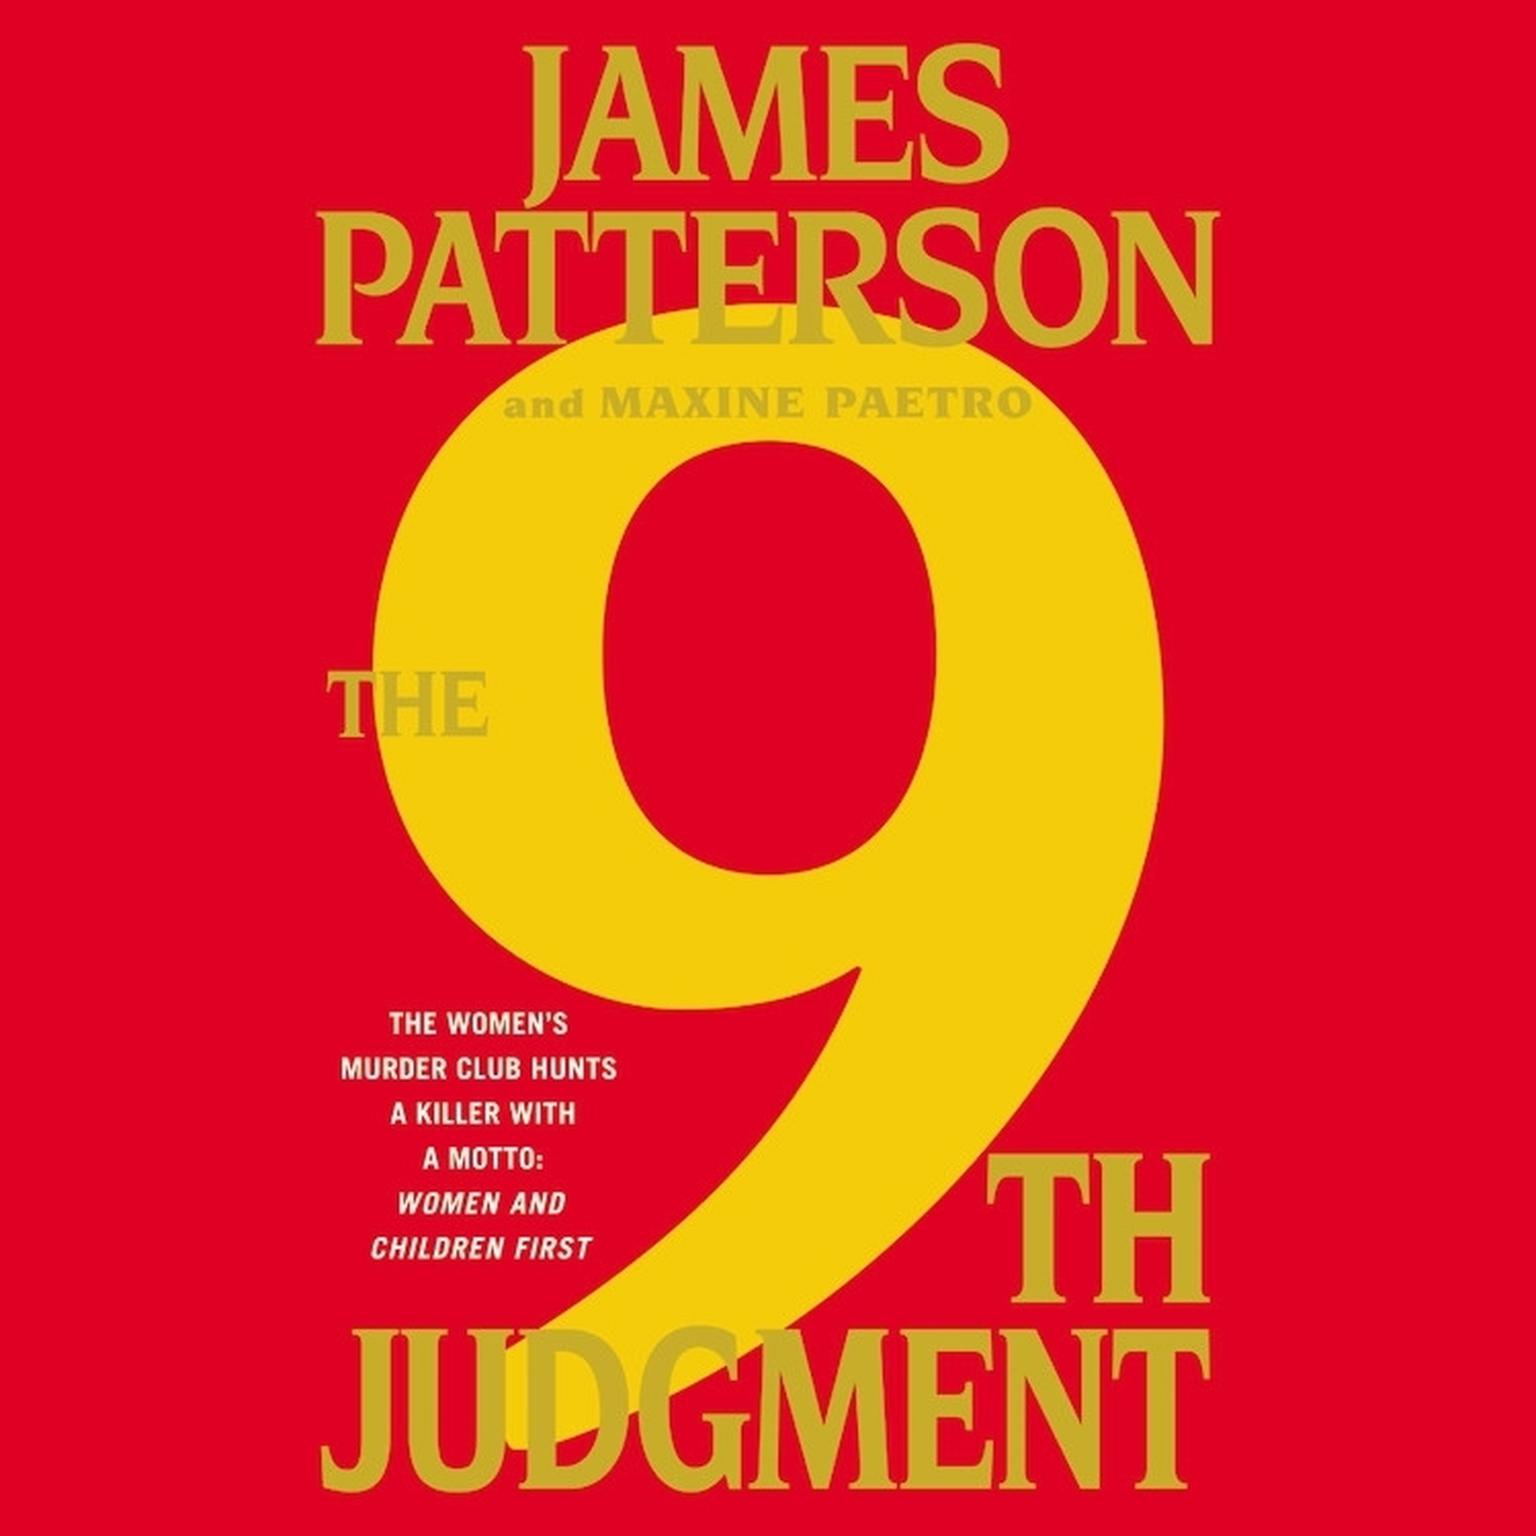 The 9th Judgment Audiobook (abridged) by James Patterson — Listen Now